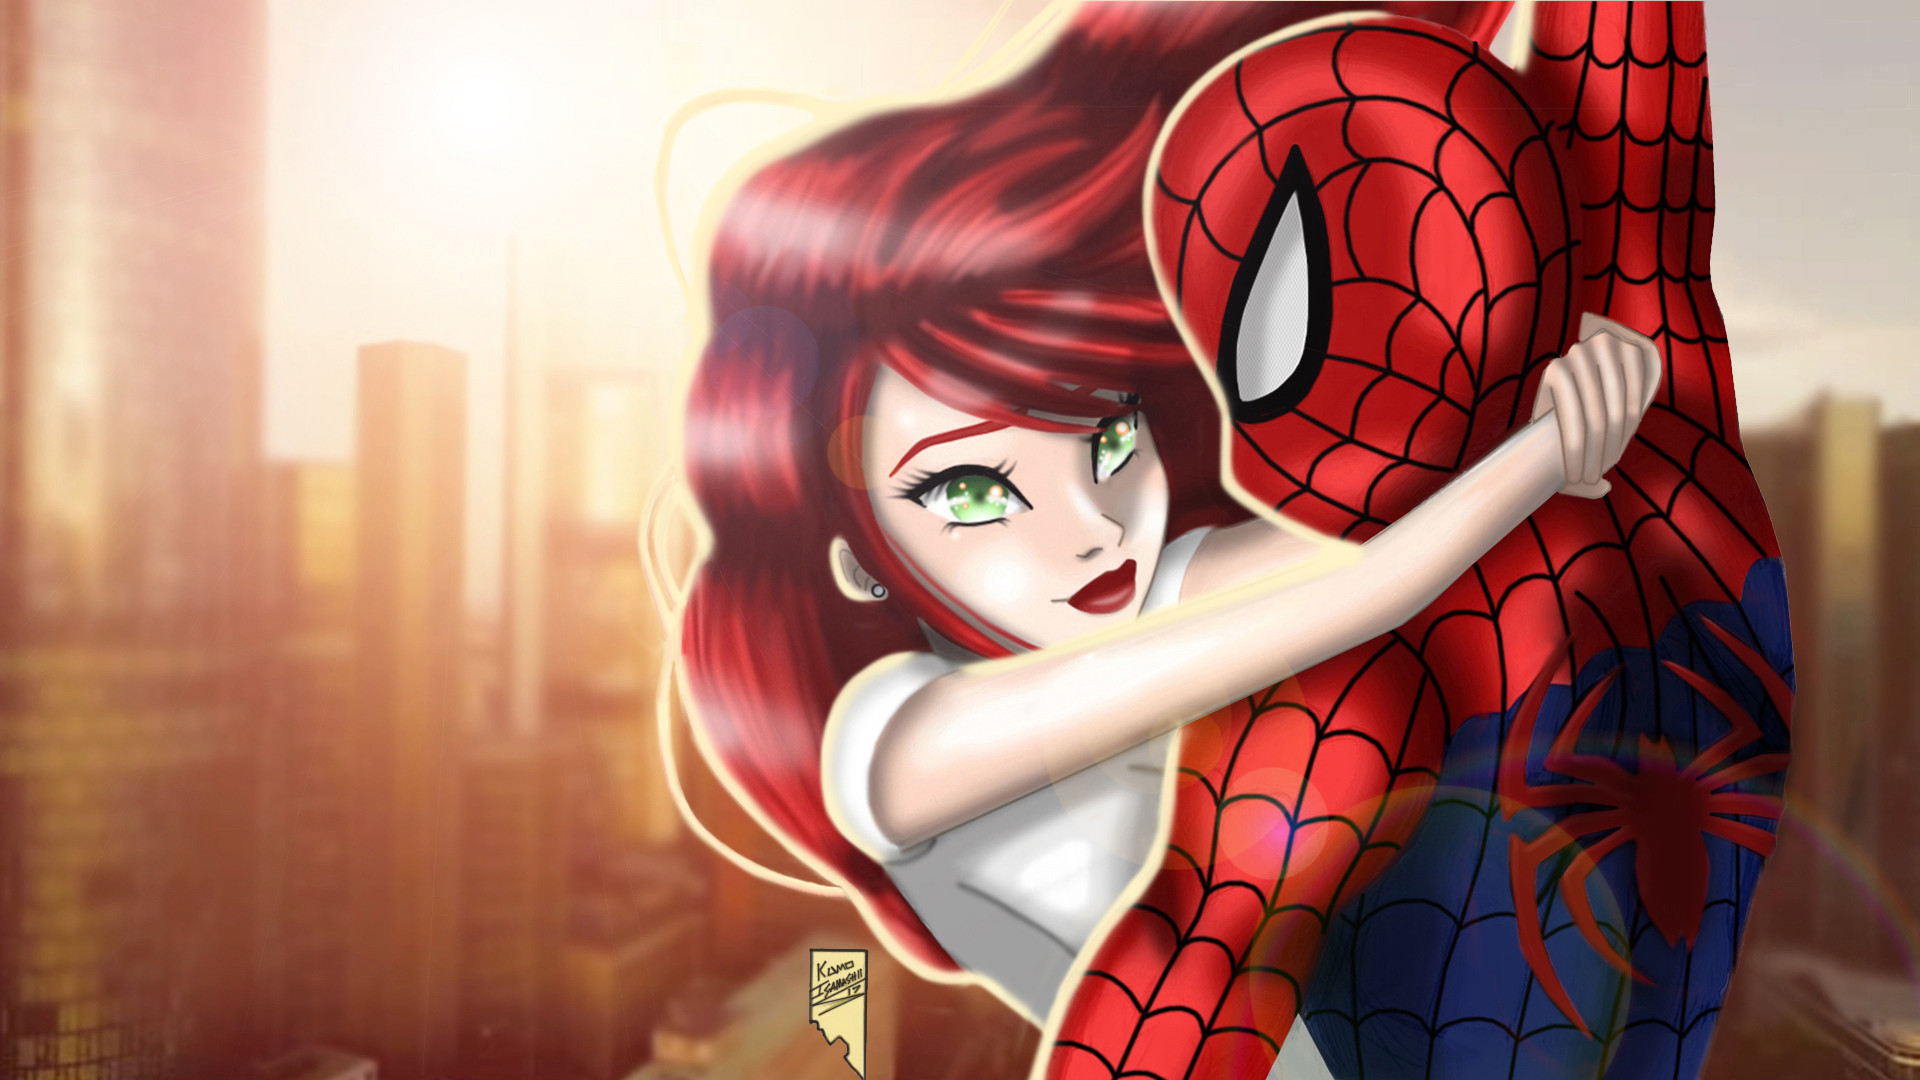 1920x1080 Spider Man and Mary Jane Daylight and City Lights